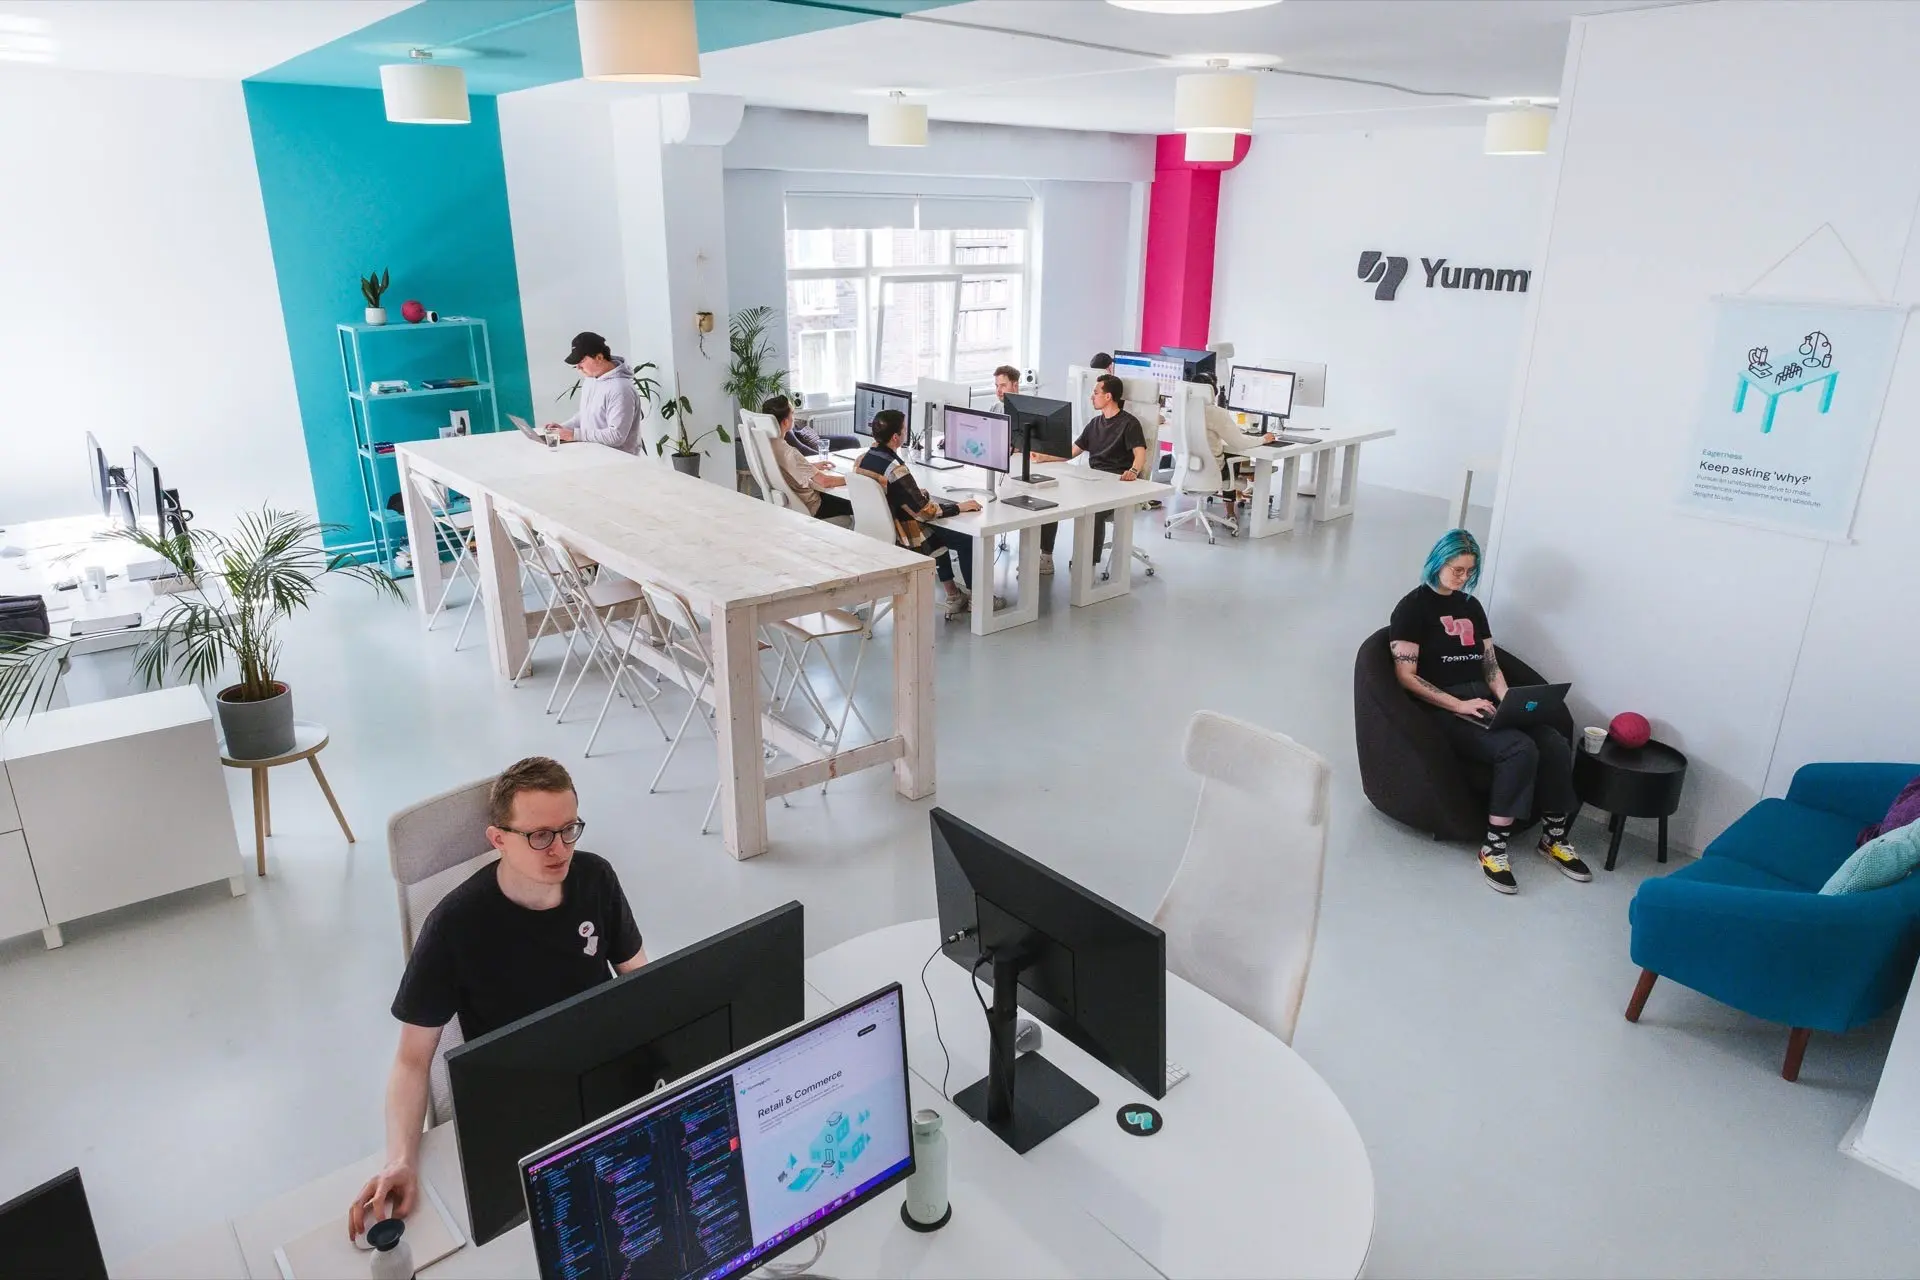 The Yummygum team working at the office.